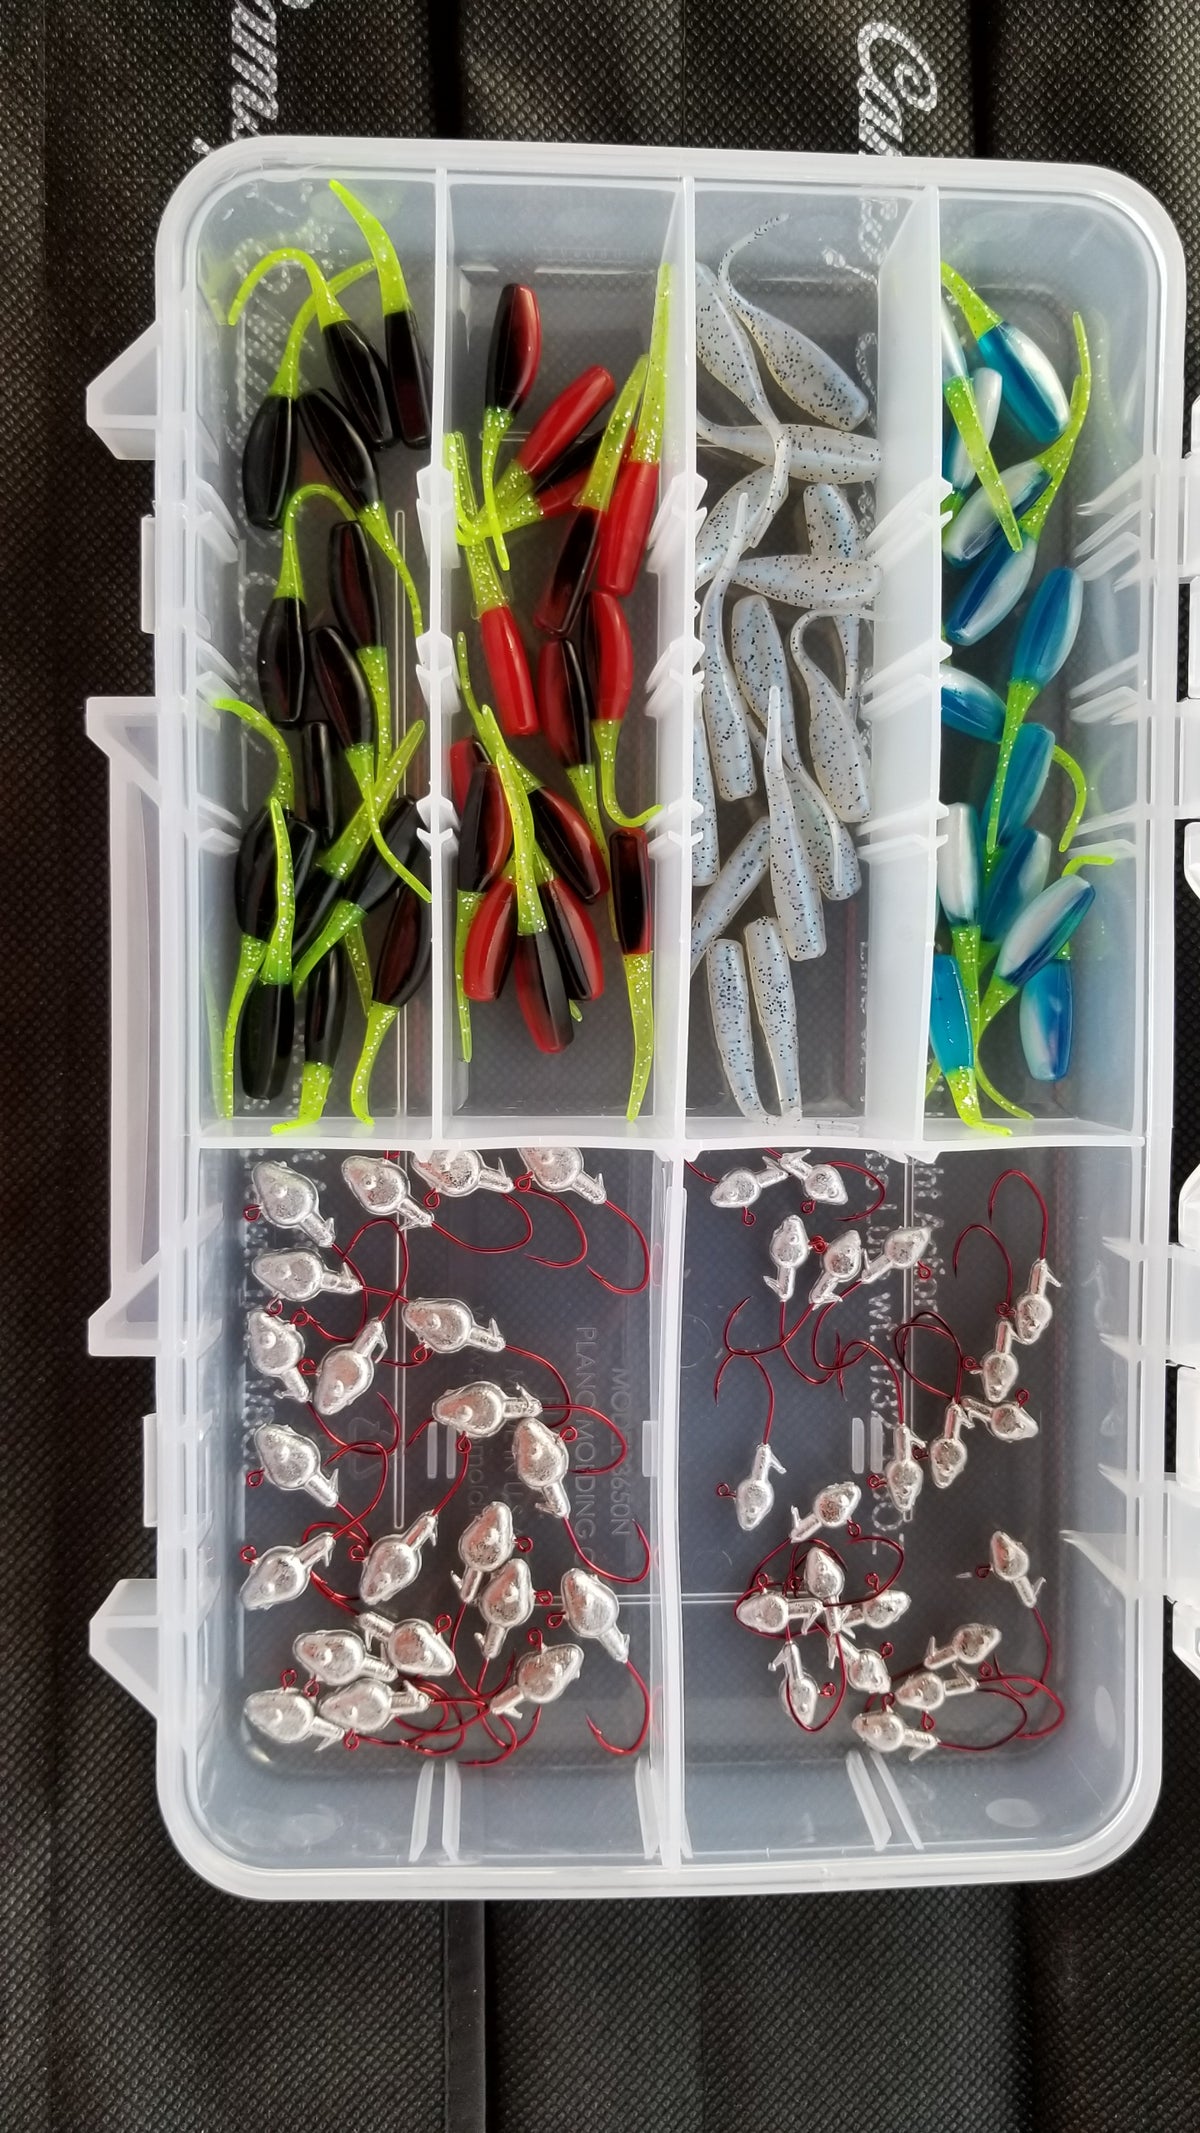 Cam's Nasty Bend Hook Stinger Shad Assortment Package (NO SUBSTITUTIONS)